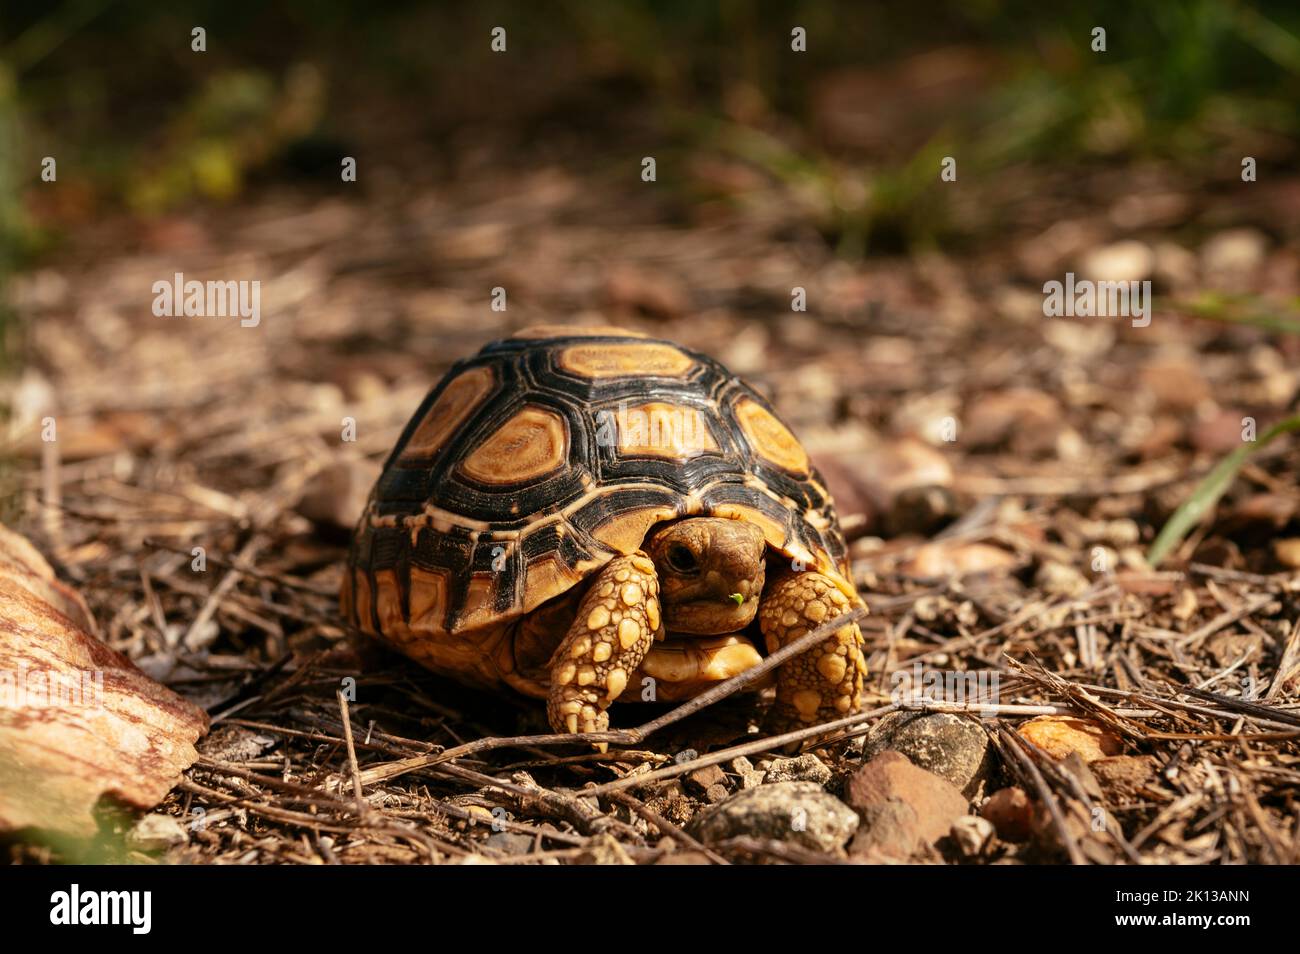 Leopard Tortoise, Makuleke Contractual Park, Kruger National Park, South Africa, Africa Stock Photo